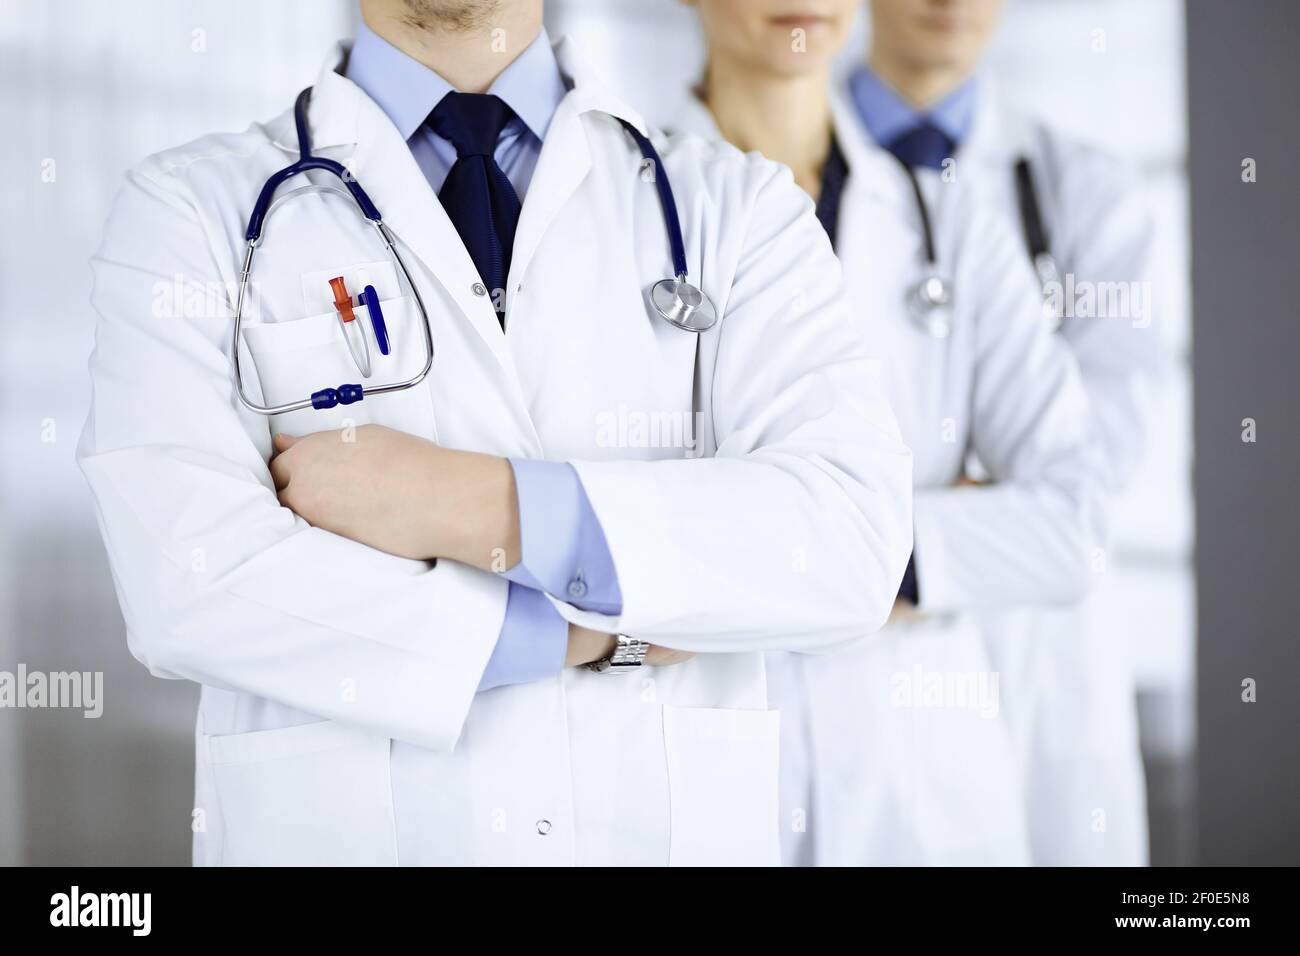 Group of modern doctors standing as a team with crossed arms and stethoscopes in hospital office. Physicians ready to examine and help patients Stock Photo